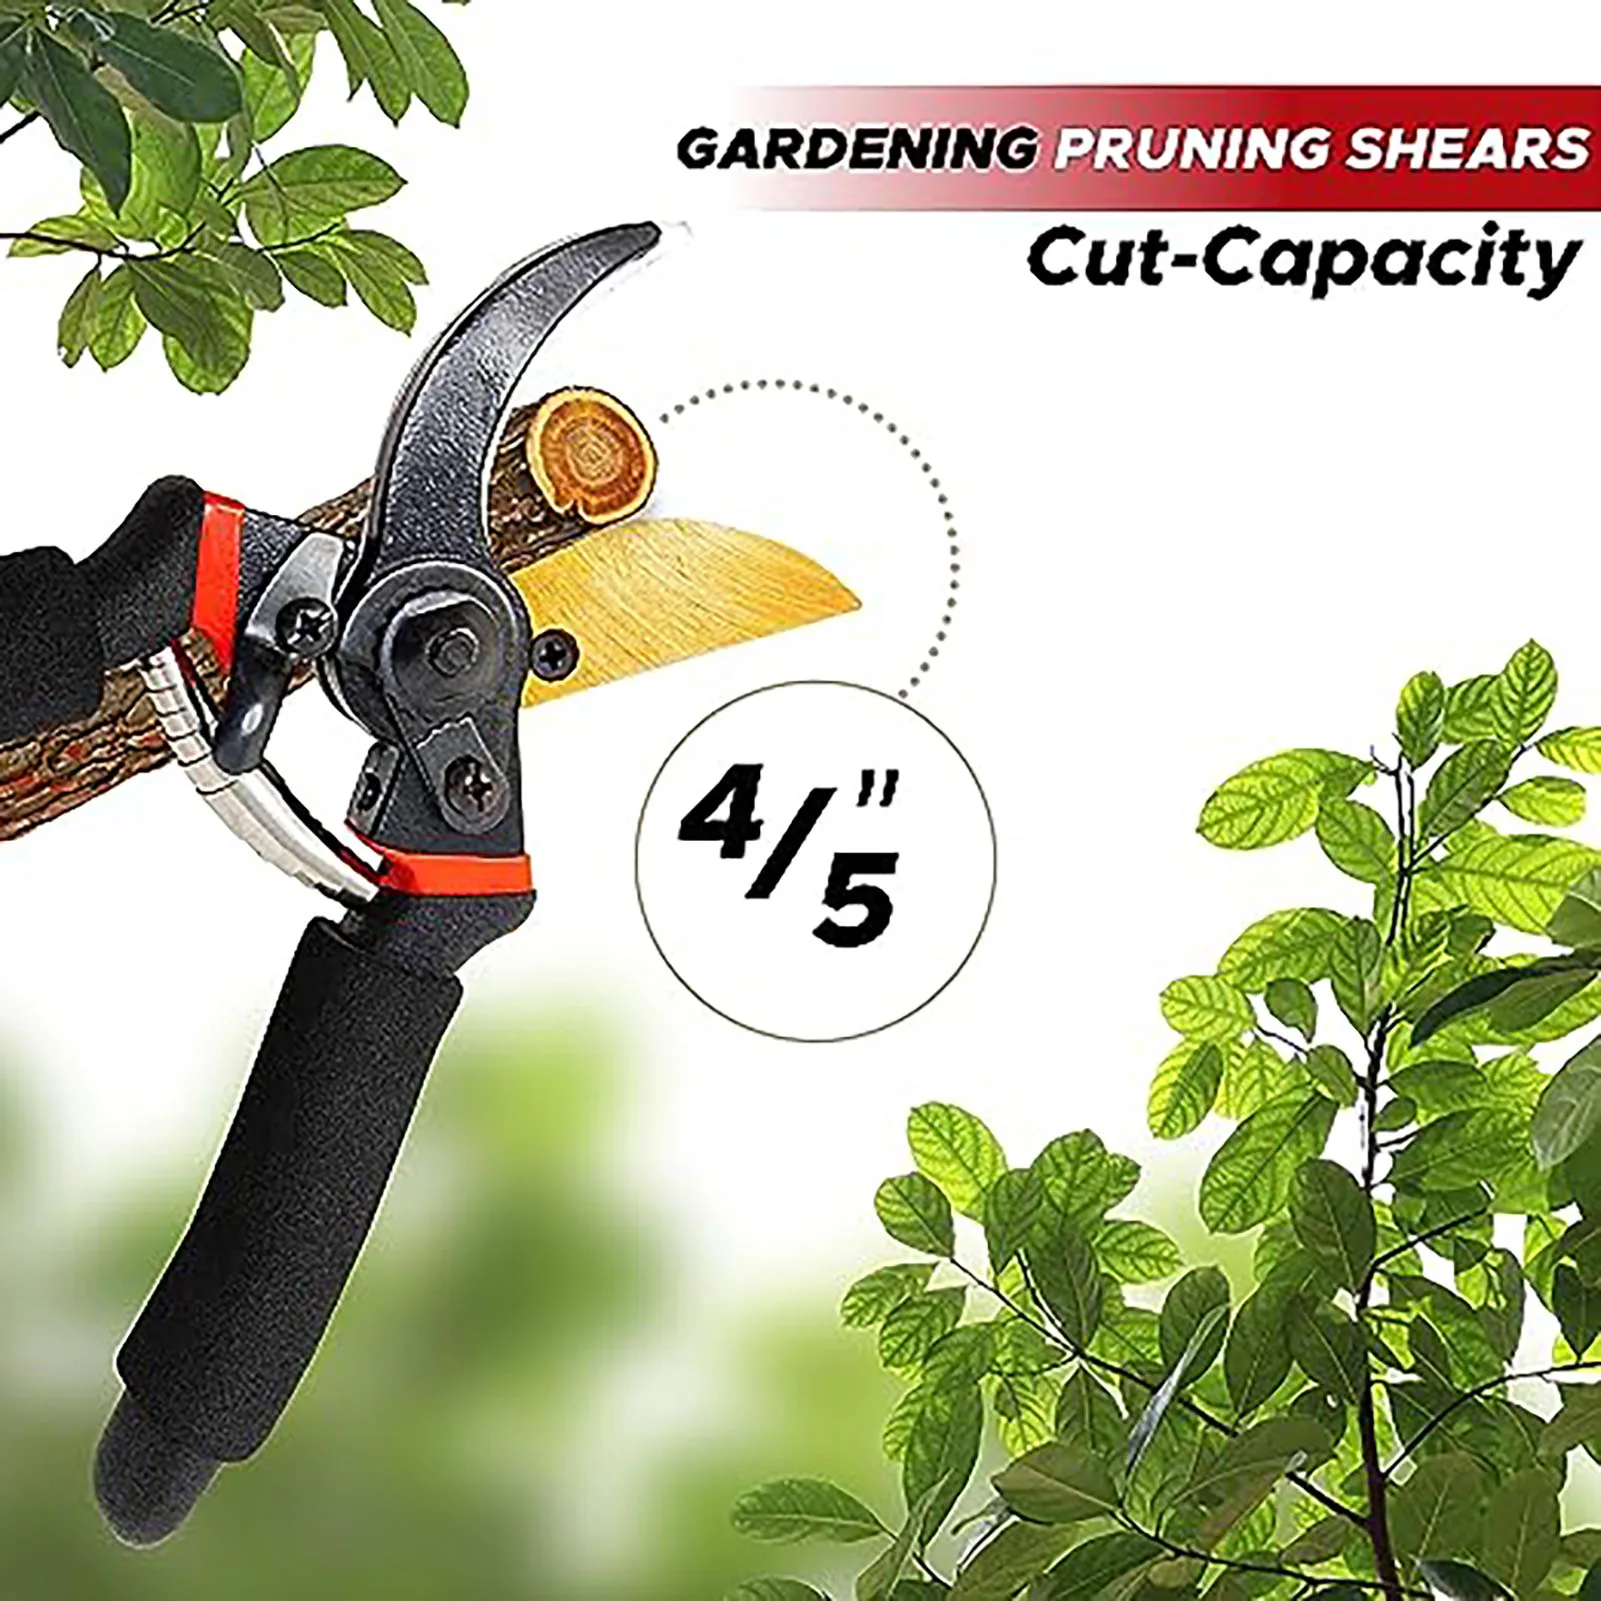 

Garden Pruning Shears Cutter Picking Scissors Precise Cut With Rust-free Sharp Blades Suitable For Harvest Fruits And Vegetables